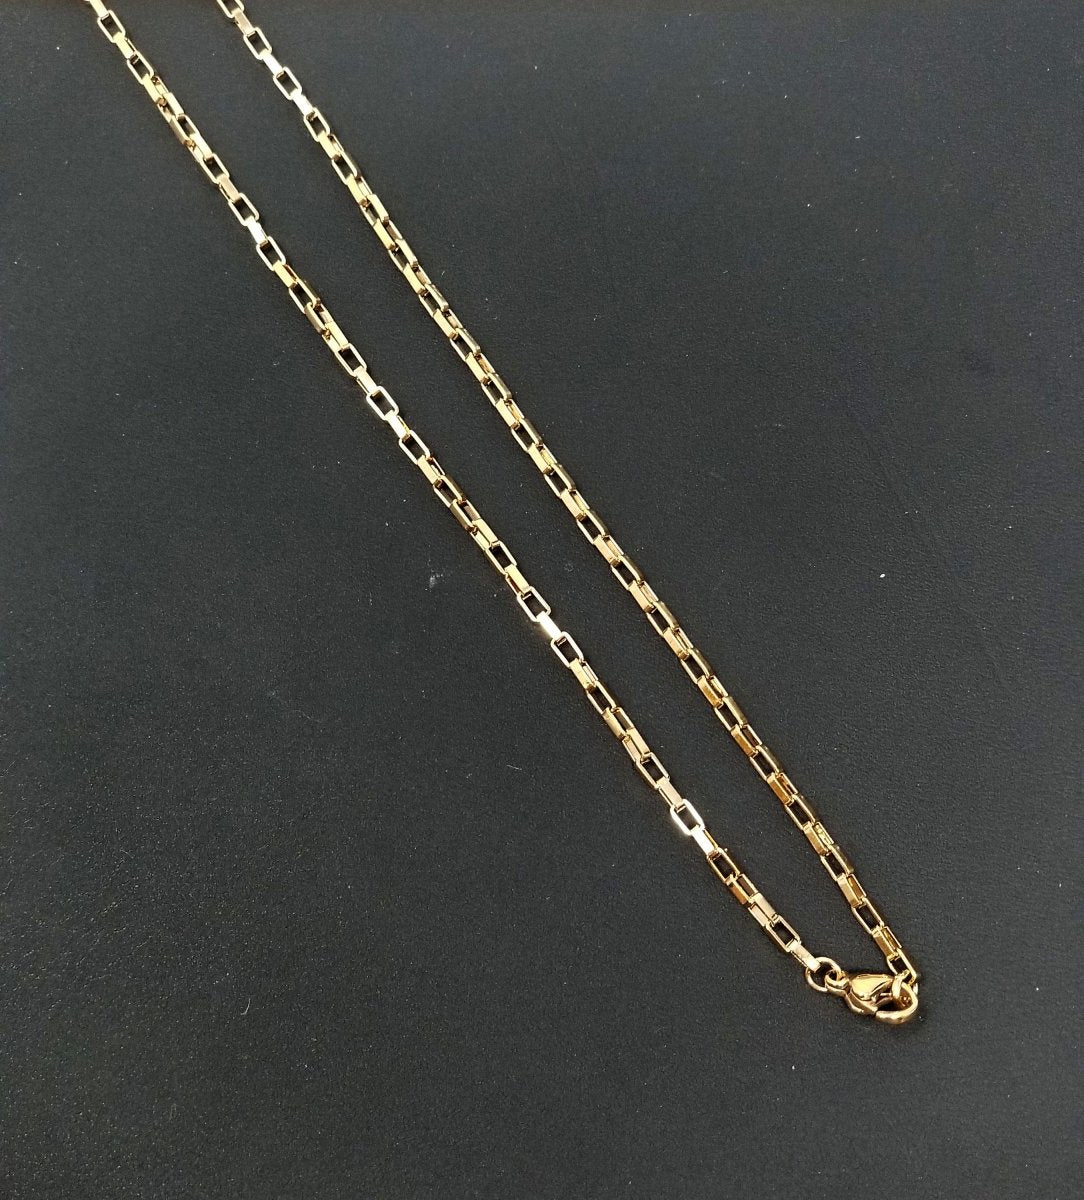 18K Gold Filled Necklace - Cable Necklace - Dainty Gold Cable Rolo Chain Layering Necklace 1mm 20 inch ready to wear chain w/ Lobster Clasp | CN-266 - DLUXCA